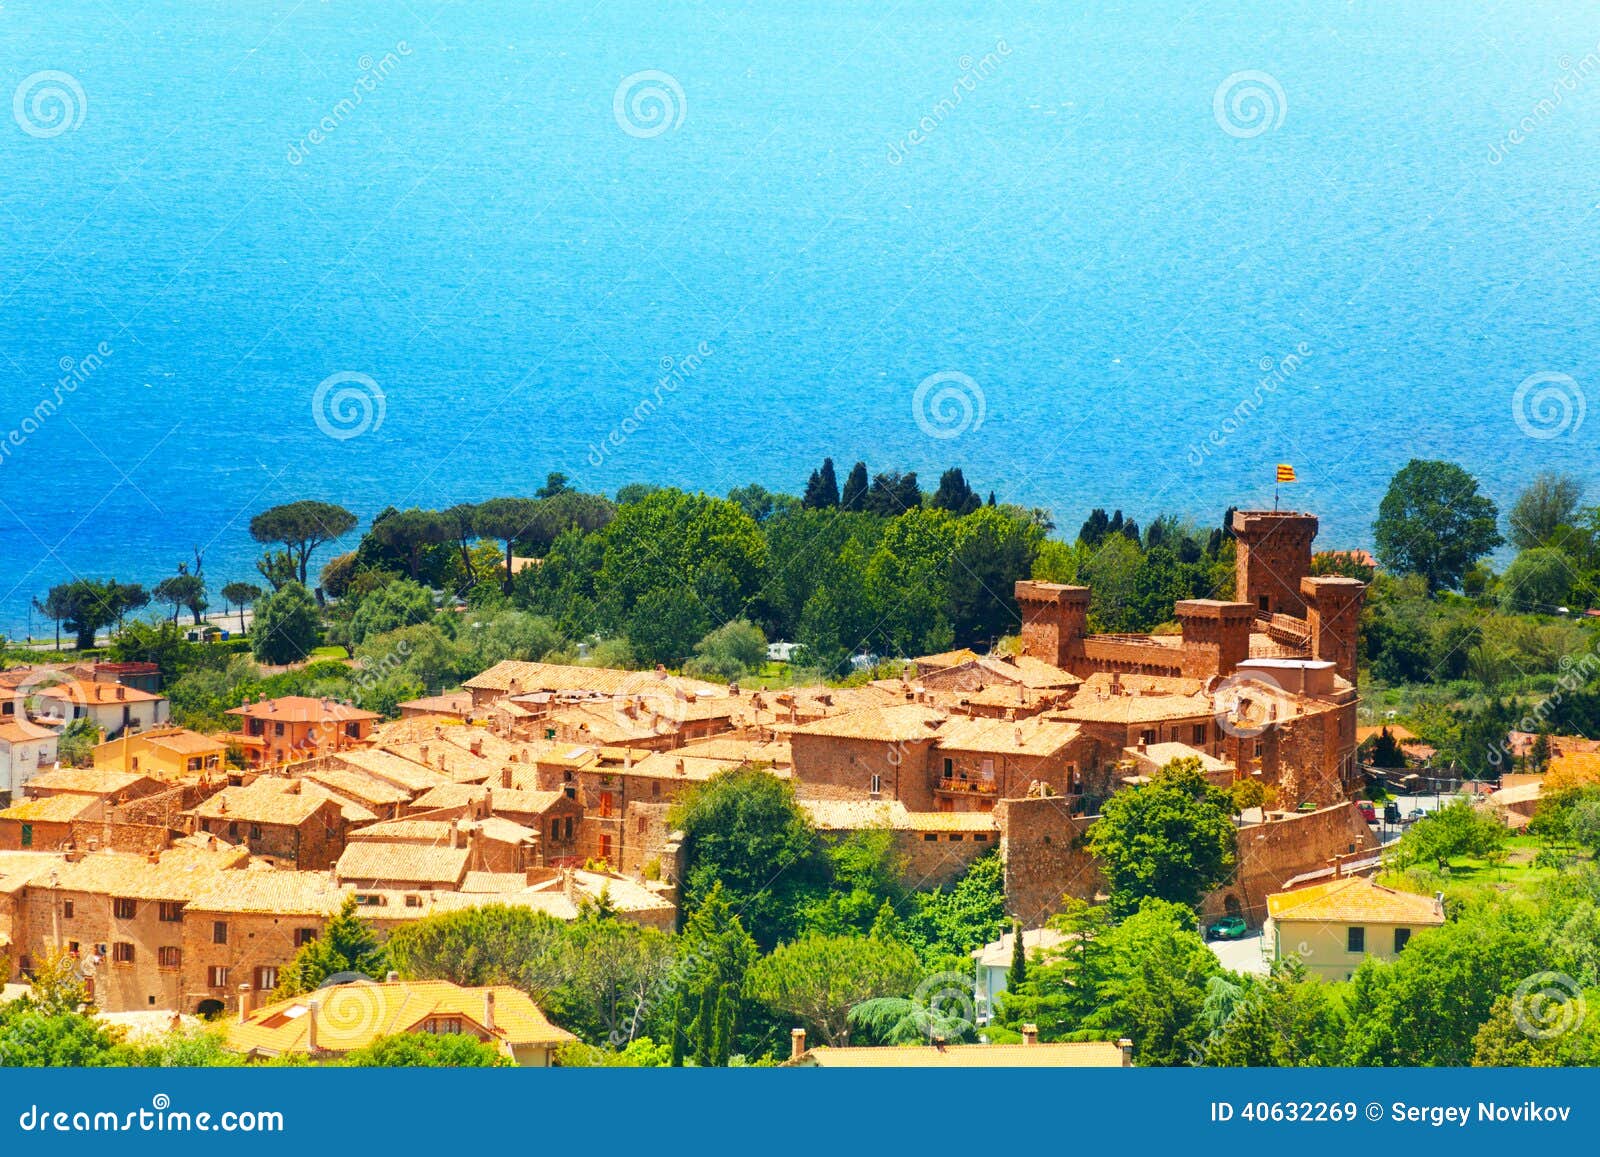 view on bolsena village and castle in italy